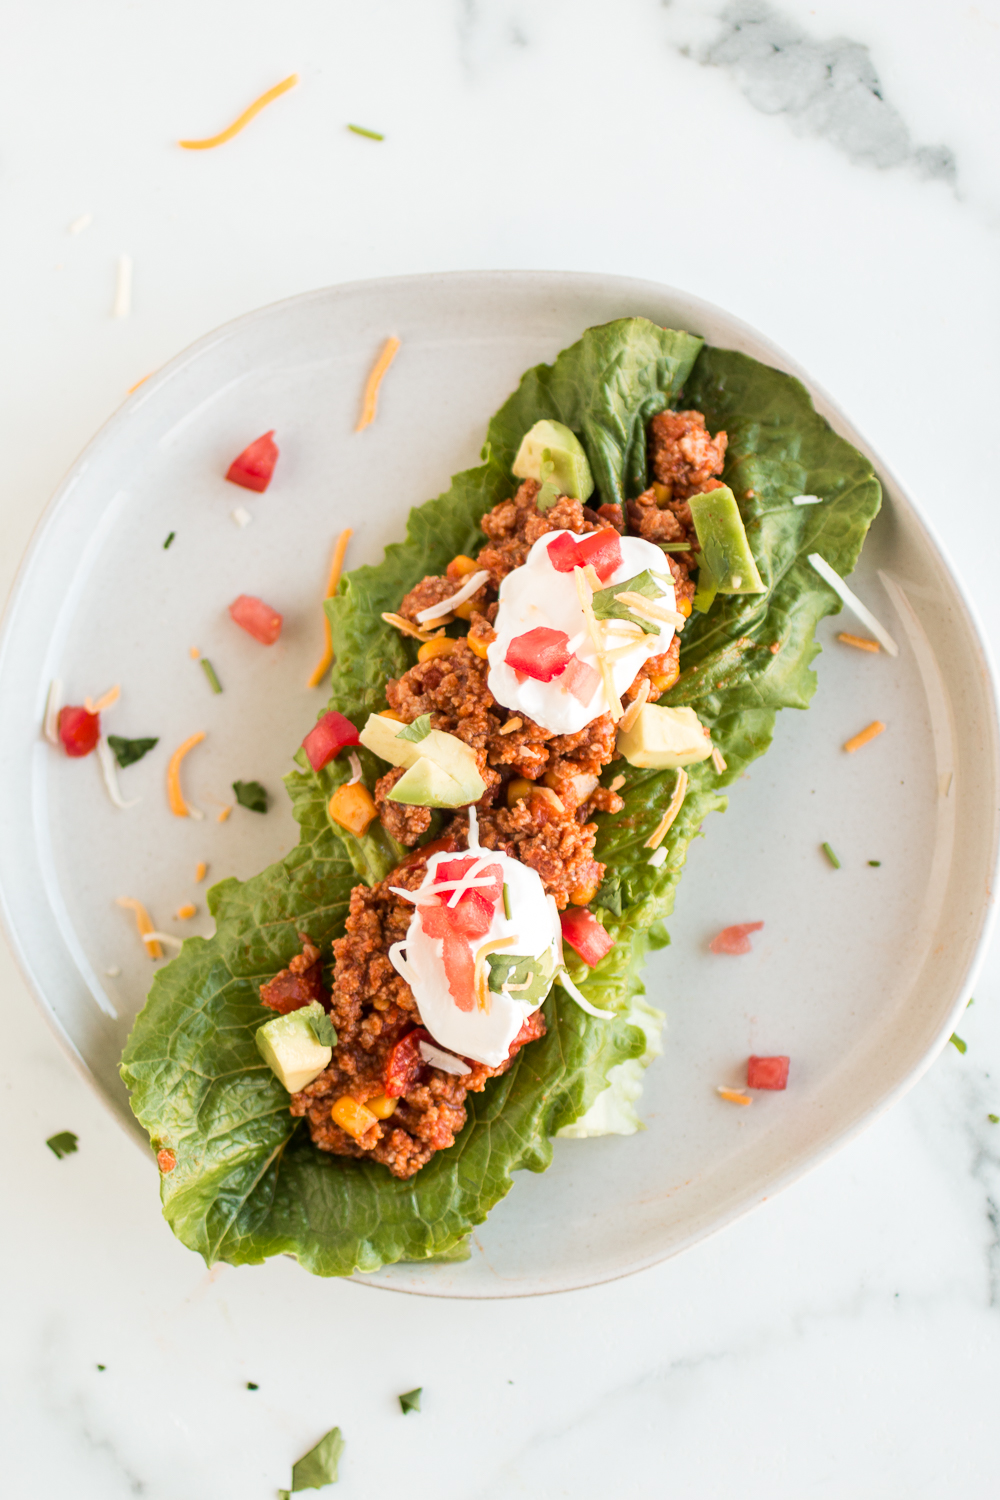 These Turkey Taco Lettuce Wraps are a delicious and low carb meal you can enjoy all year round! Top with your favorite taco toppings and it's a perfect family friendly meal. 